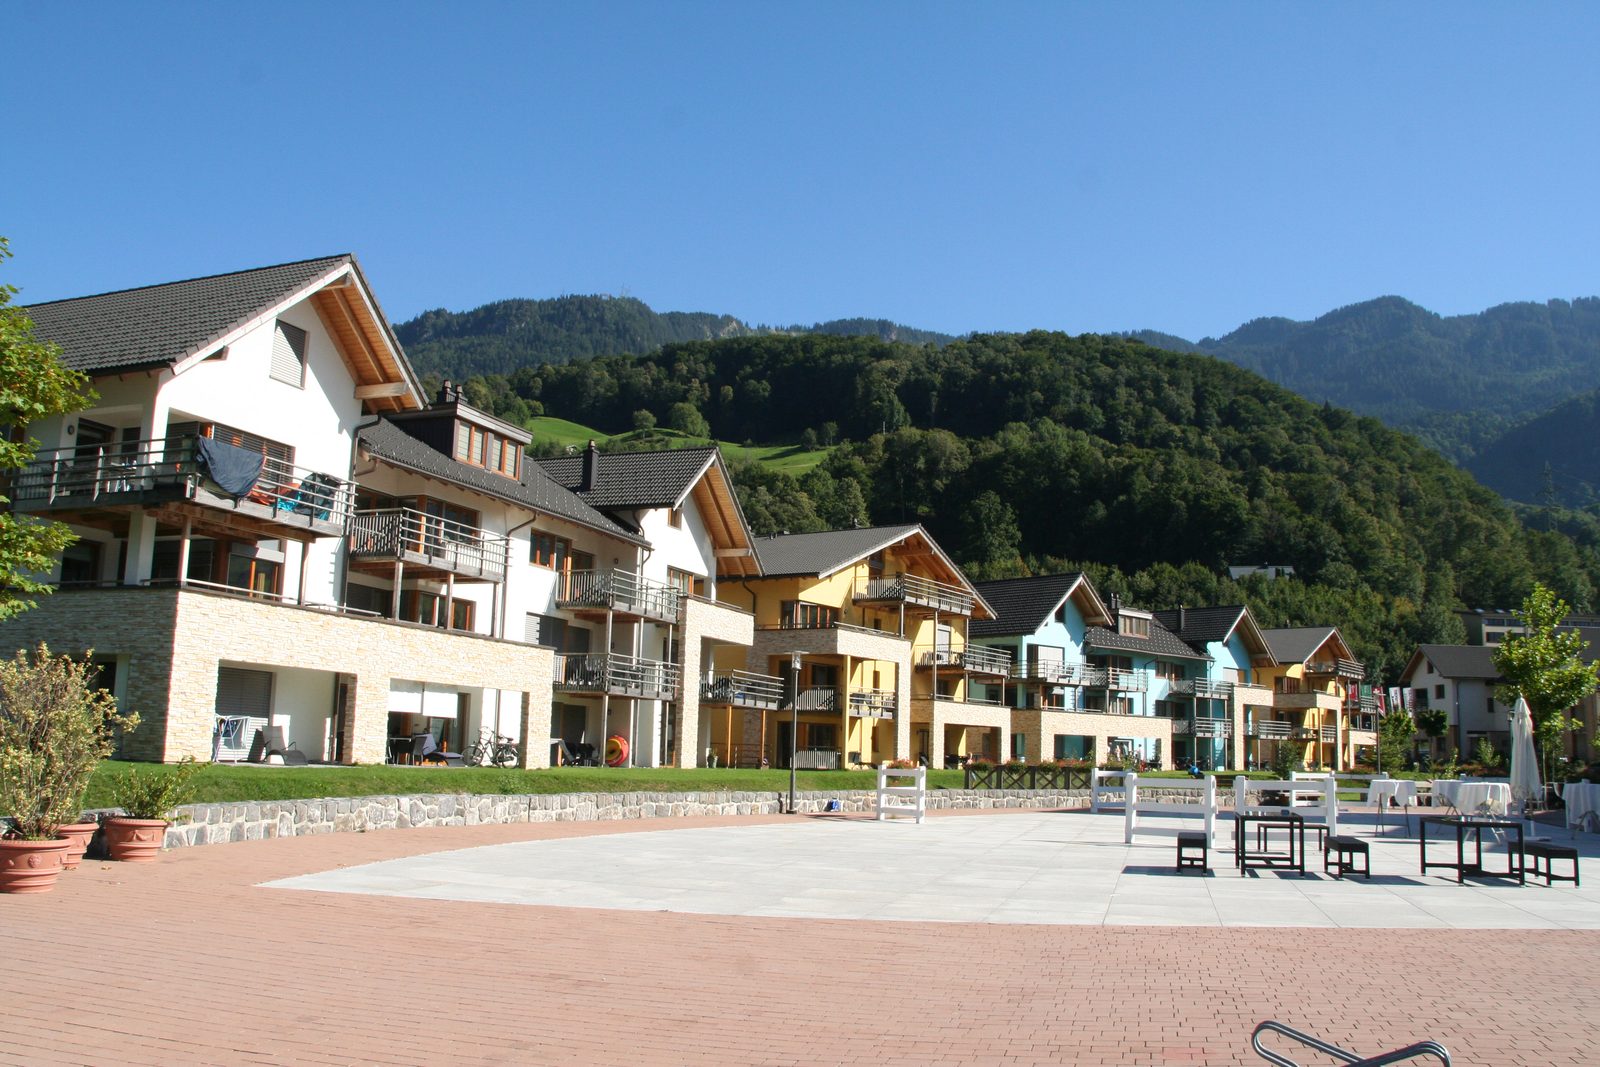 Apartments at the village square of Resort Walensee in Heidiland Flumserberg Switzerland during spring break